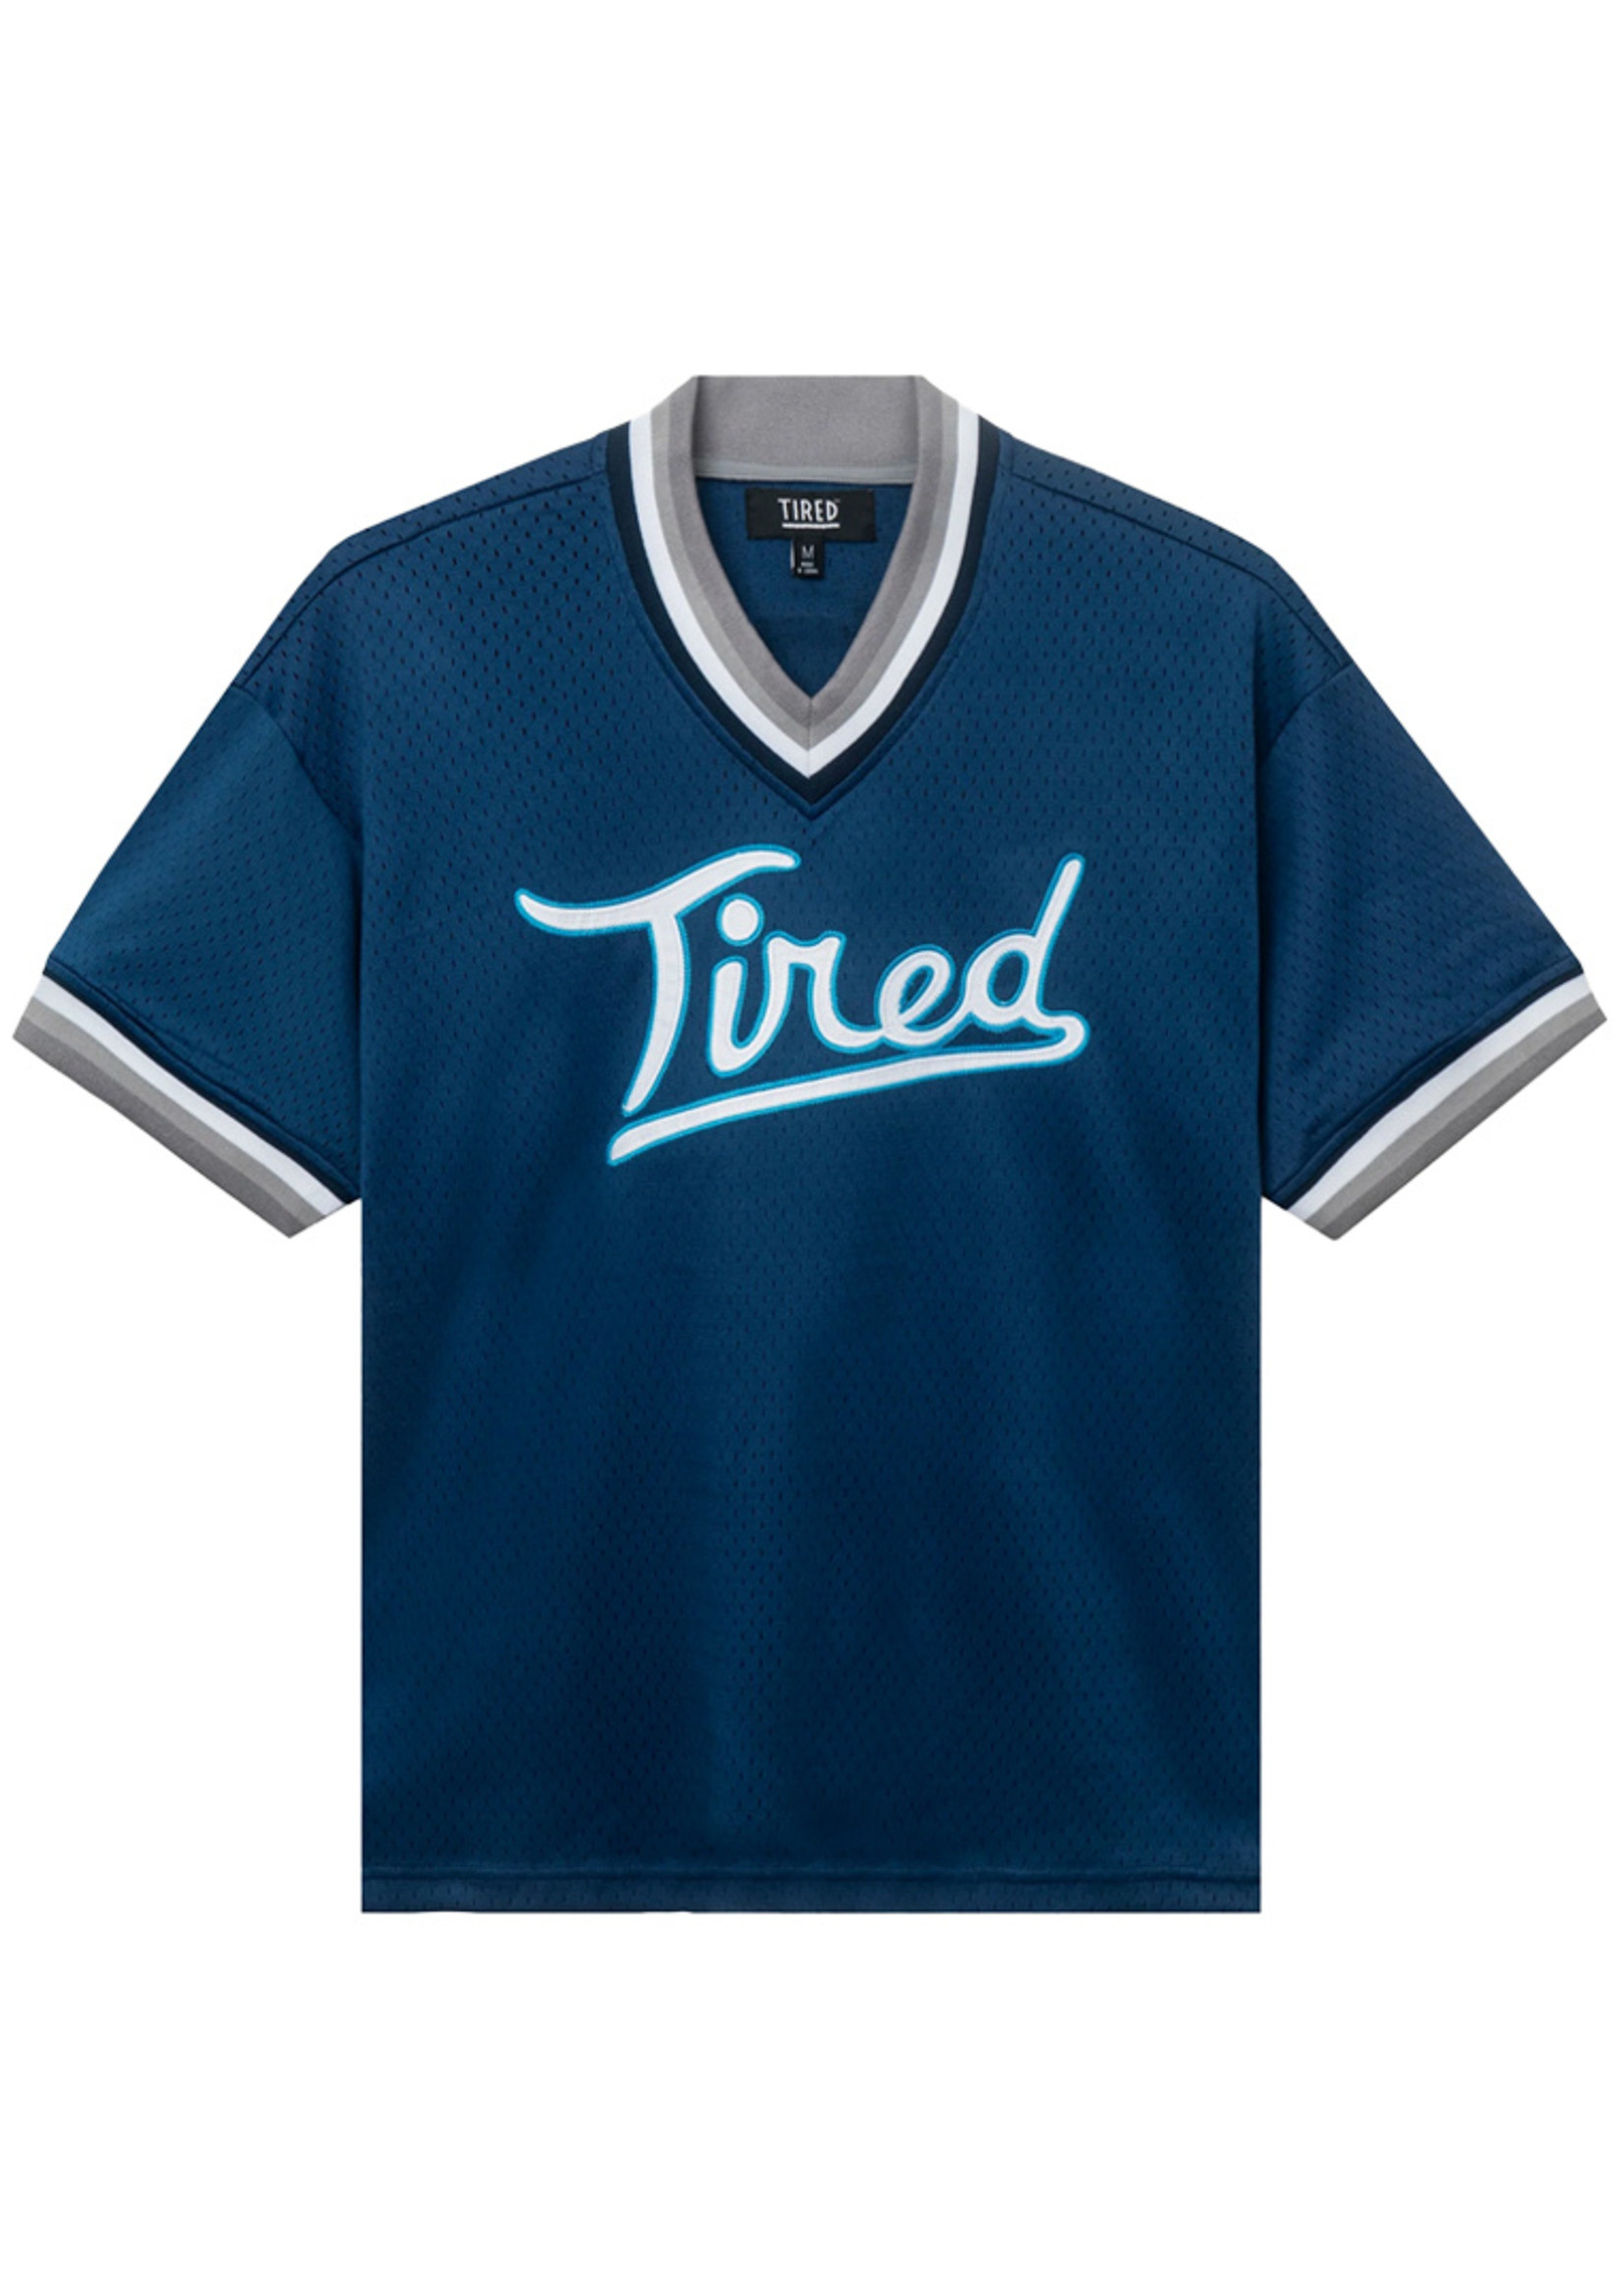 TIRED SKATEBOARDS TIRED ROUNDERS JERSEY - NAVY